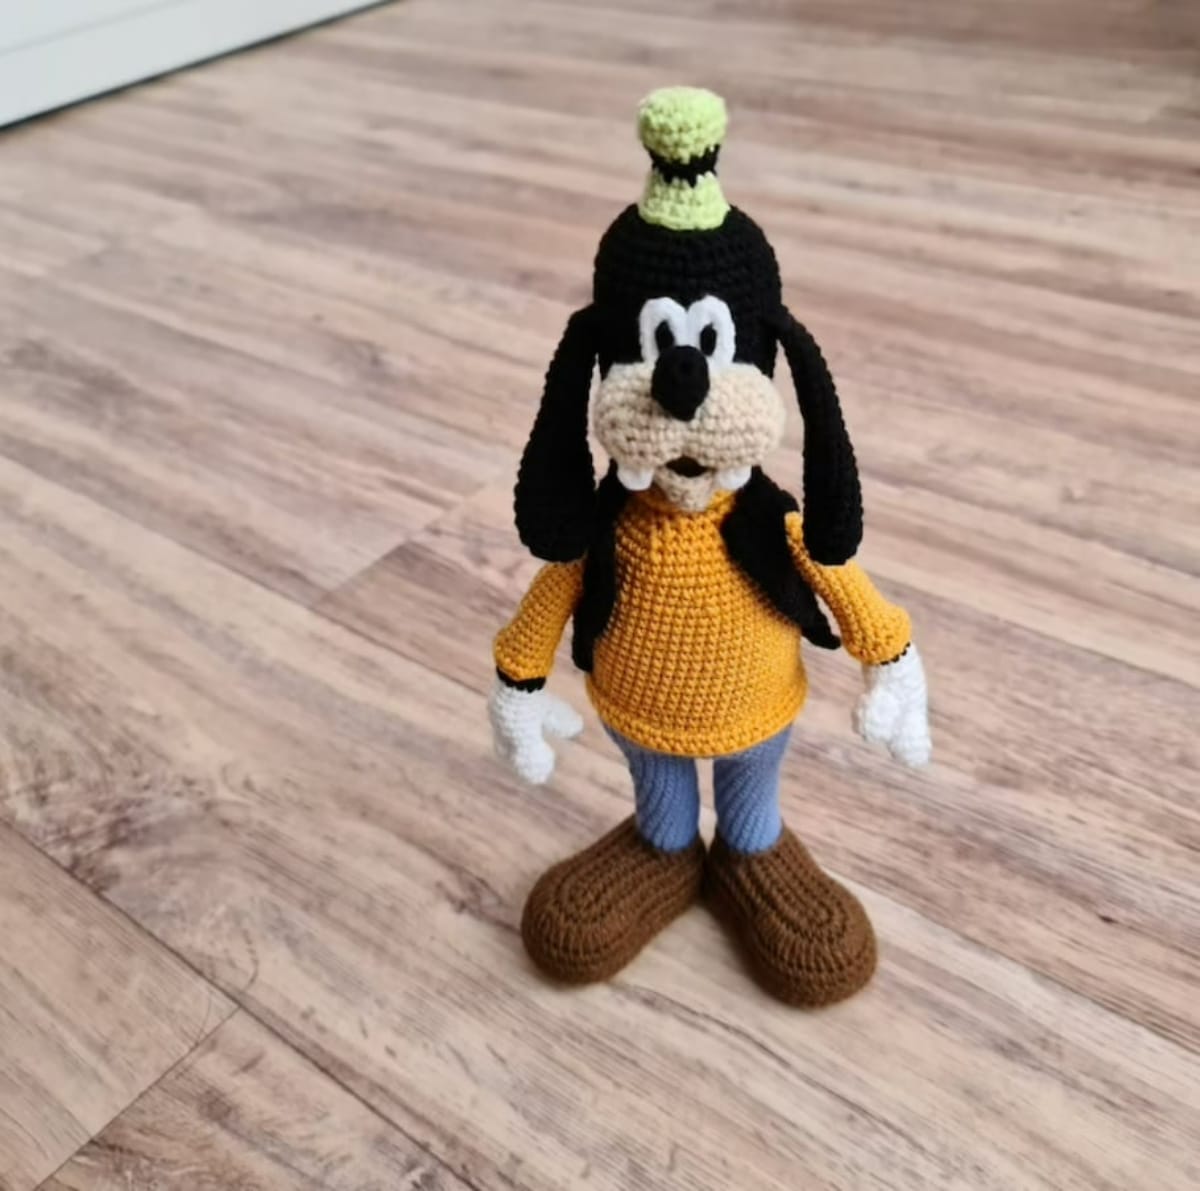 Stuffed crochet Goofy toy wearing a green hat, yellow jumper, blue trousers, and brown shoes standing on a wooden floor.